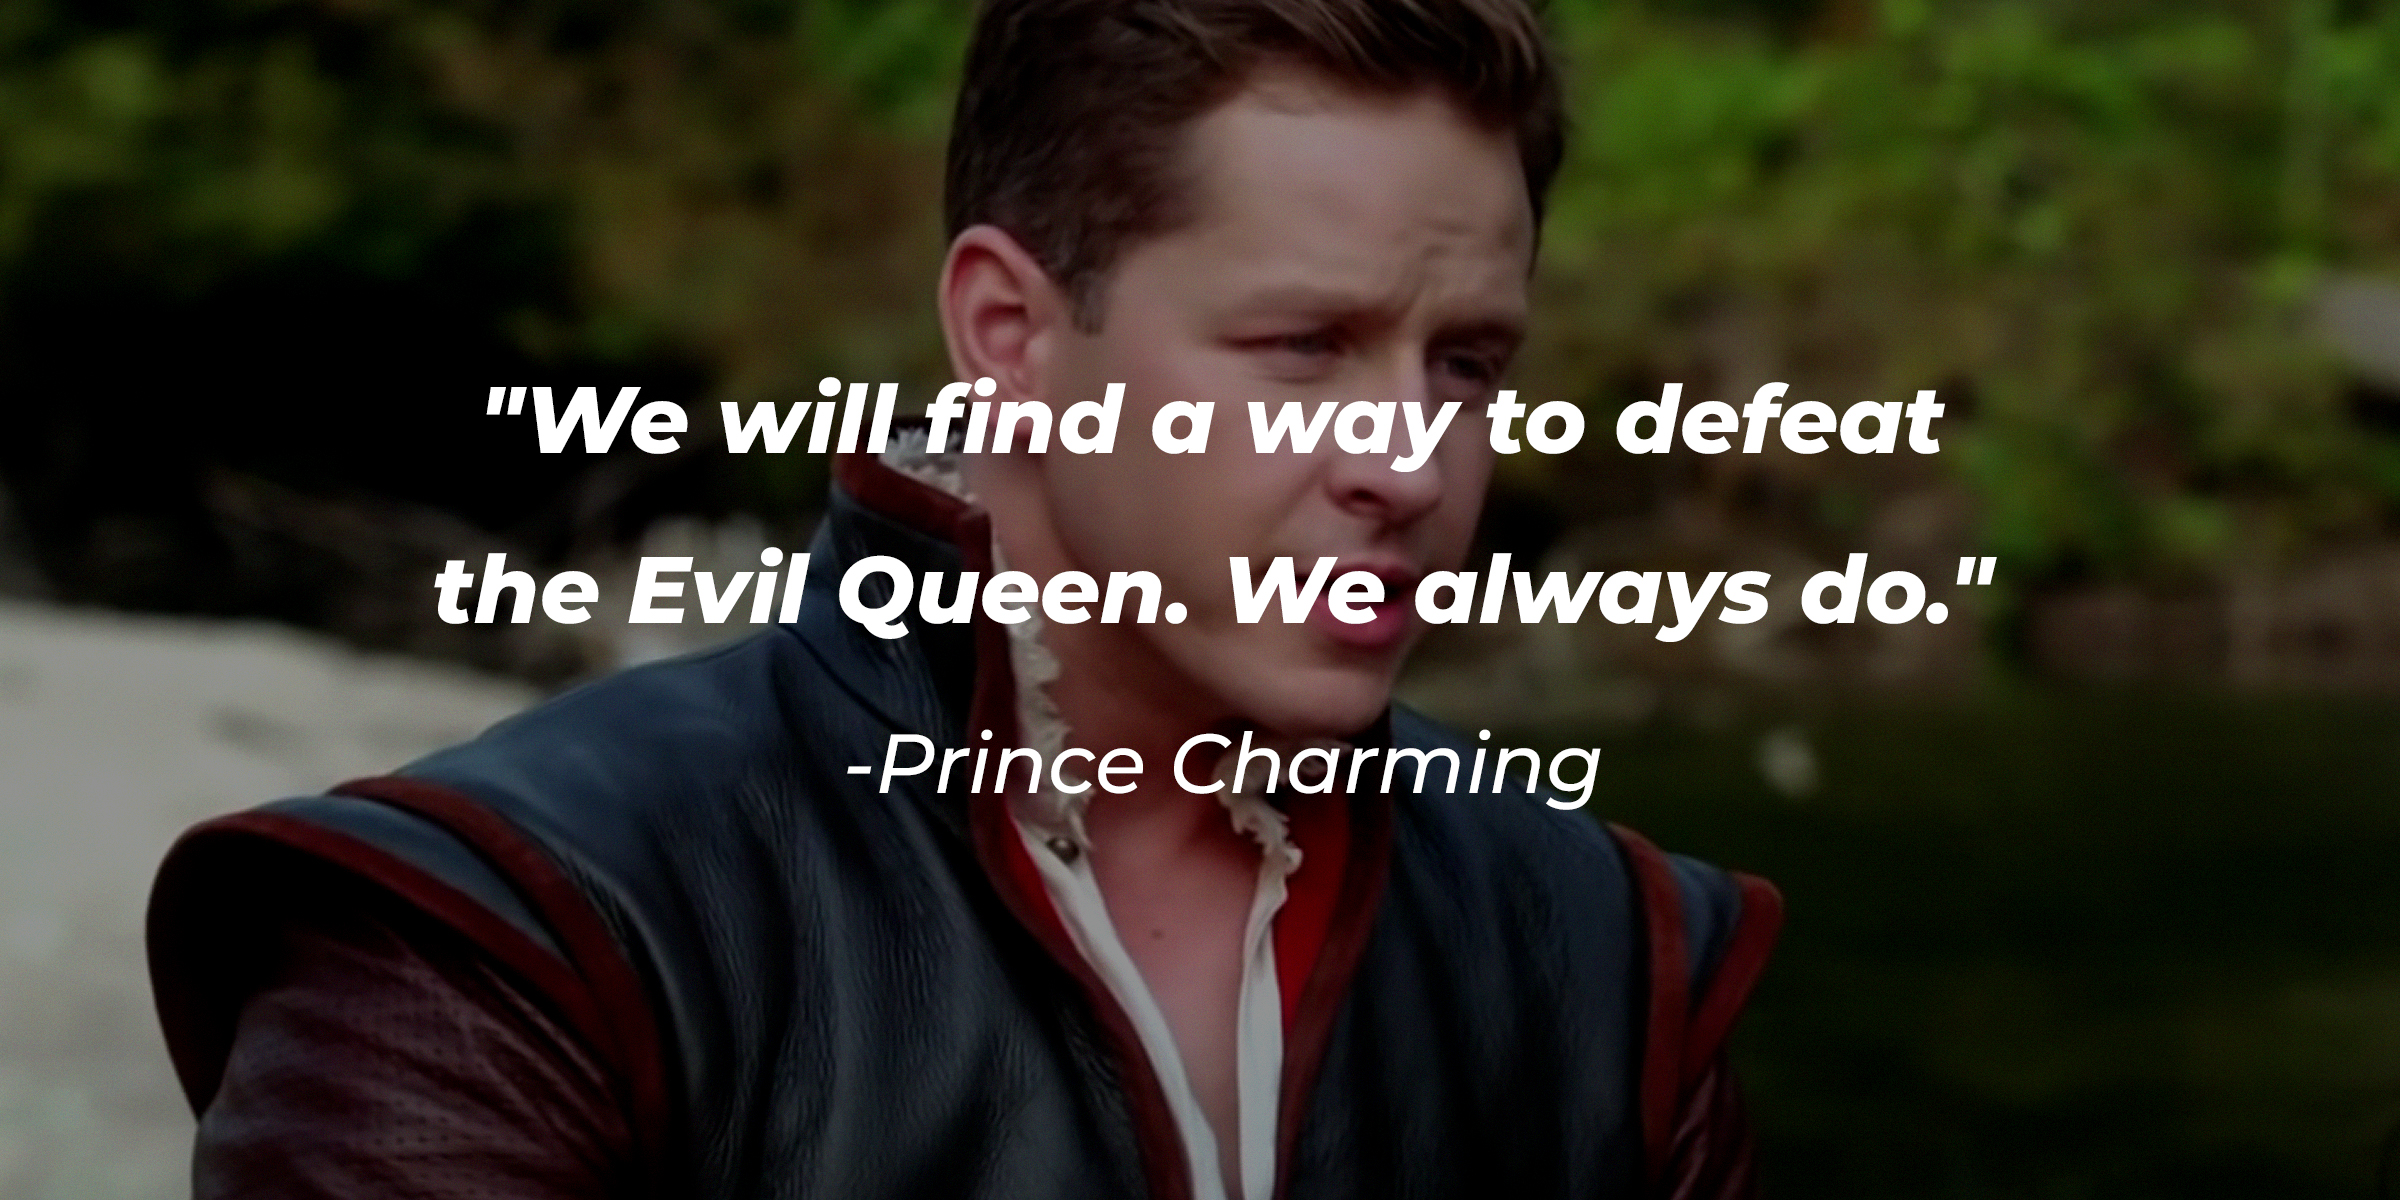 Prince Charming with his quote: "We will find a way to defeat the Evil Queen. We always do." | Source: facebook.com/OnceABC